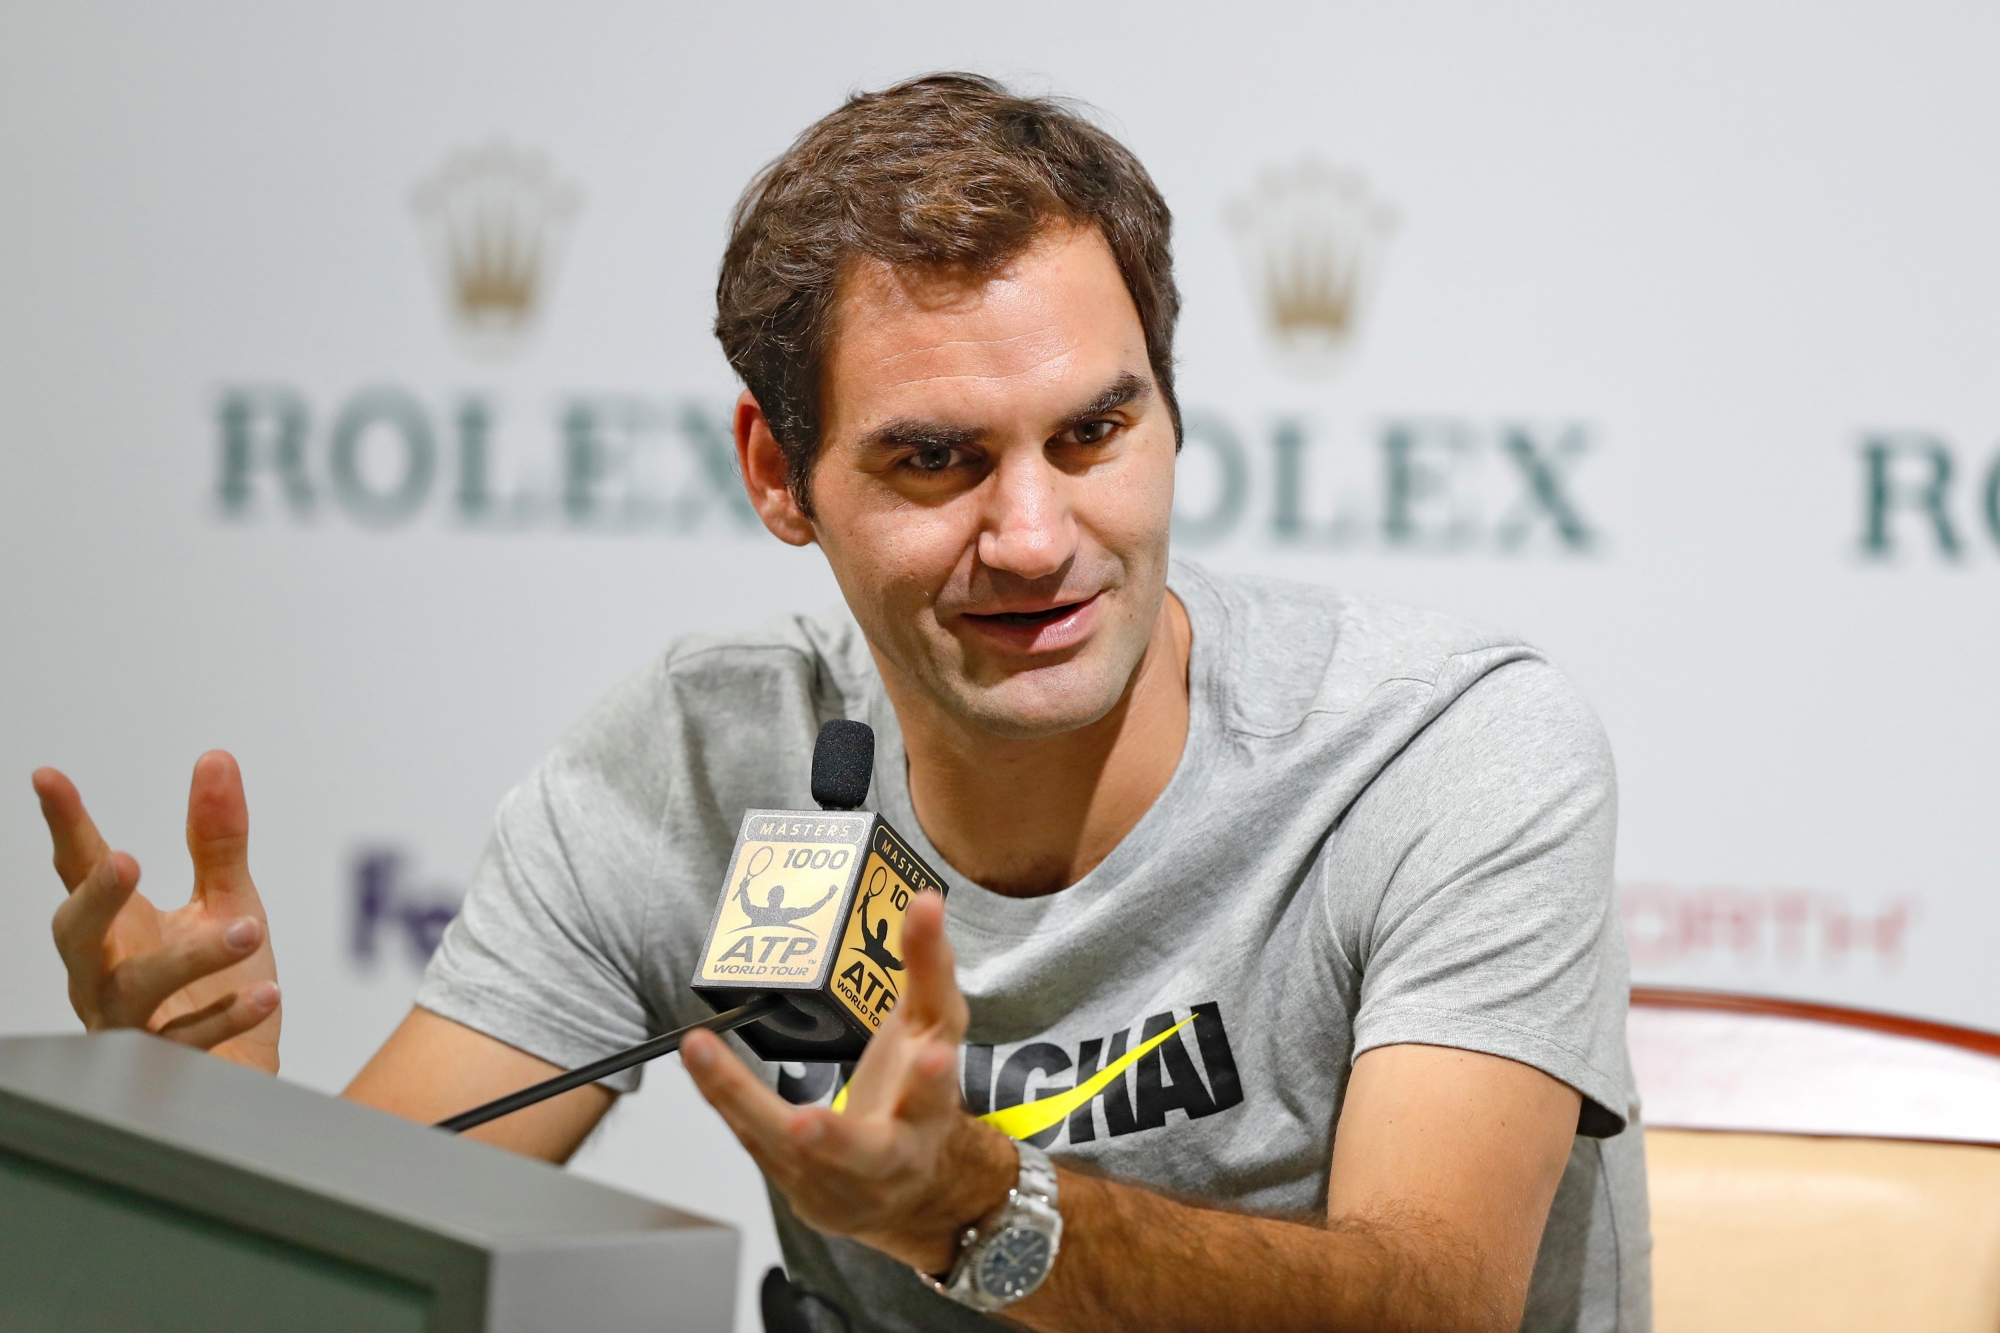 Roger Federer of Switzerland speaks during a news conference for the Shanghai Masters tennis tournament at Qizhong Forest Sports City Tennis Center in Shanghai, China, Monday, Oct. 9, 2017. (AP Photo/Andy Wong) CHINA TENNIS SHANGHAI MASTERS